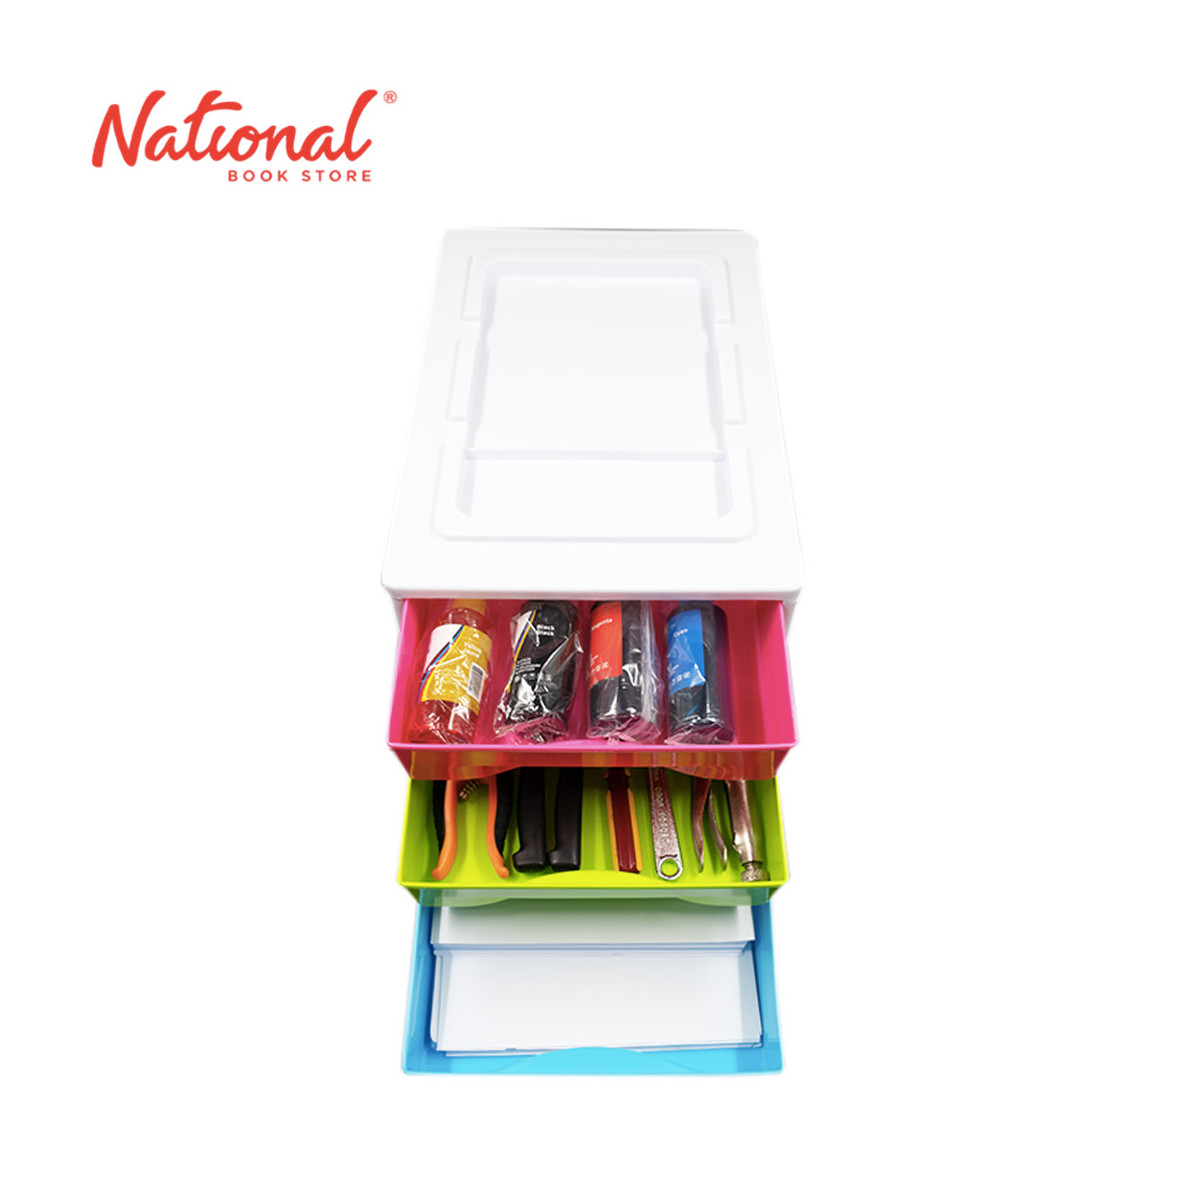 Clas Multi Tray Drawer Stackie Loaded 3 Layer, Pastel - Home & Office Organizer